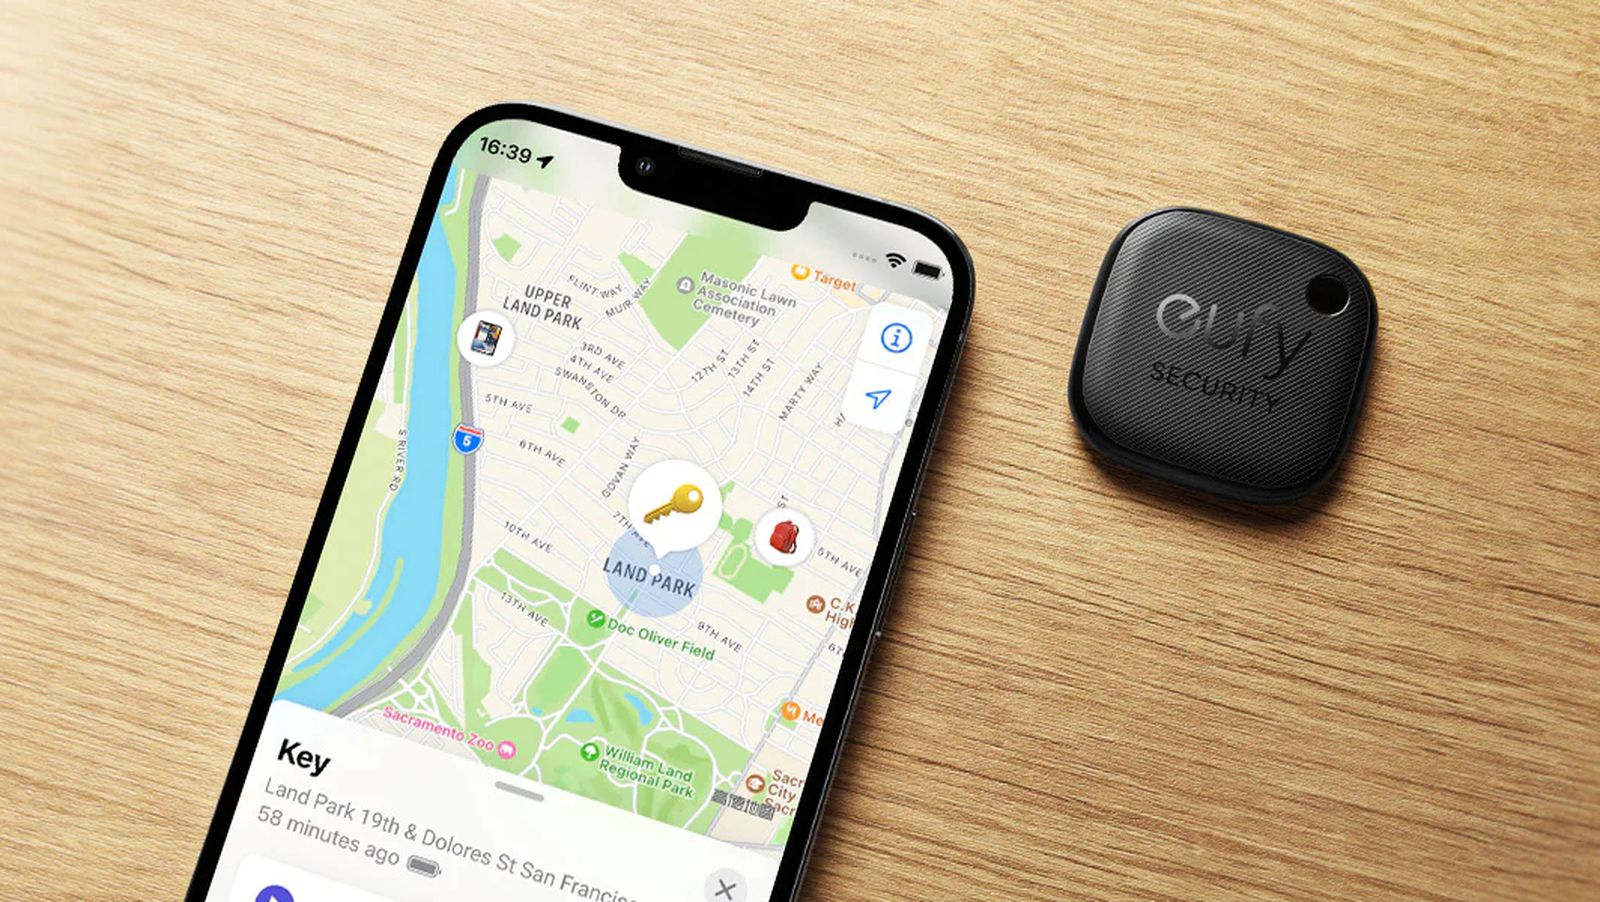 Eufy's new tracker is like a cheaper AirTag that works with Android